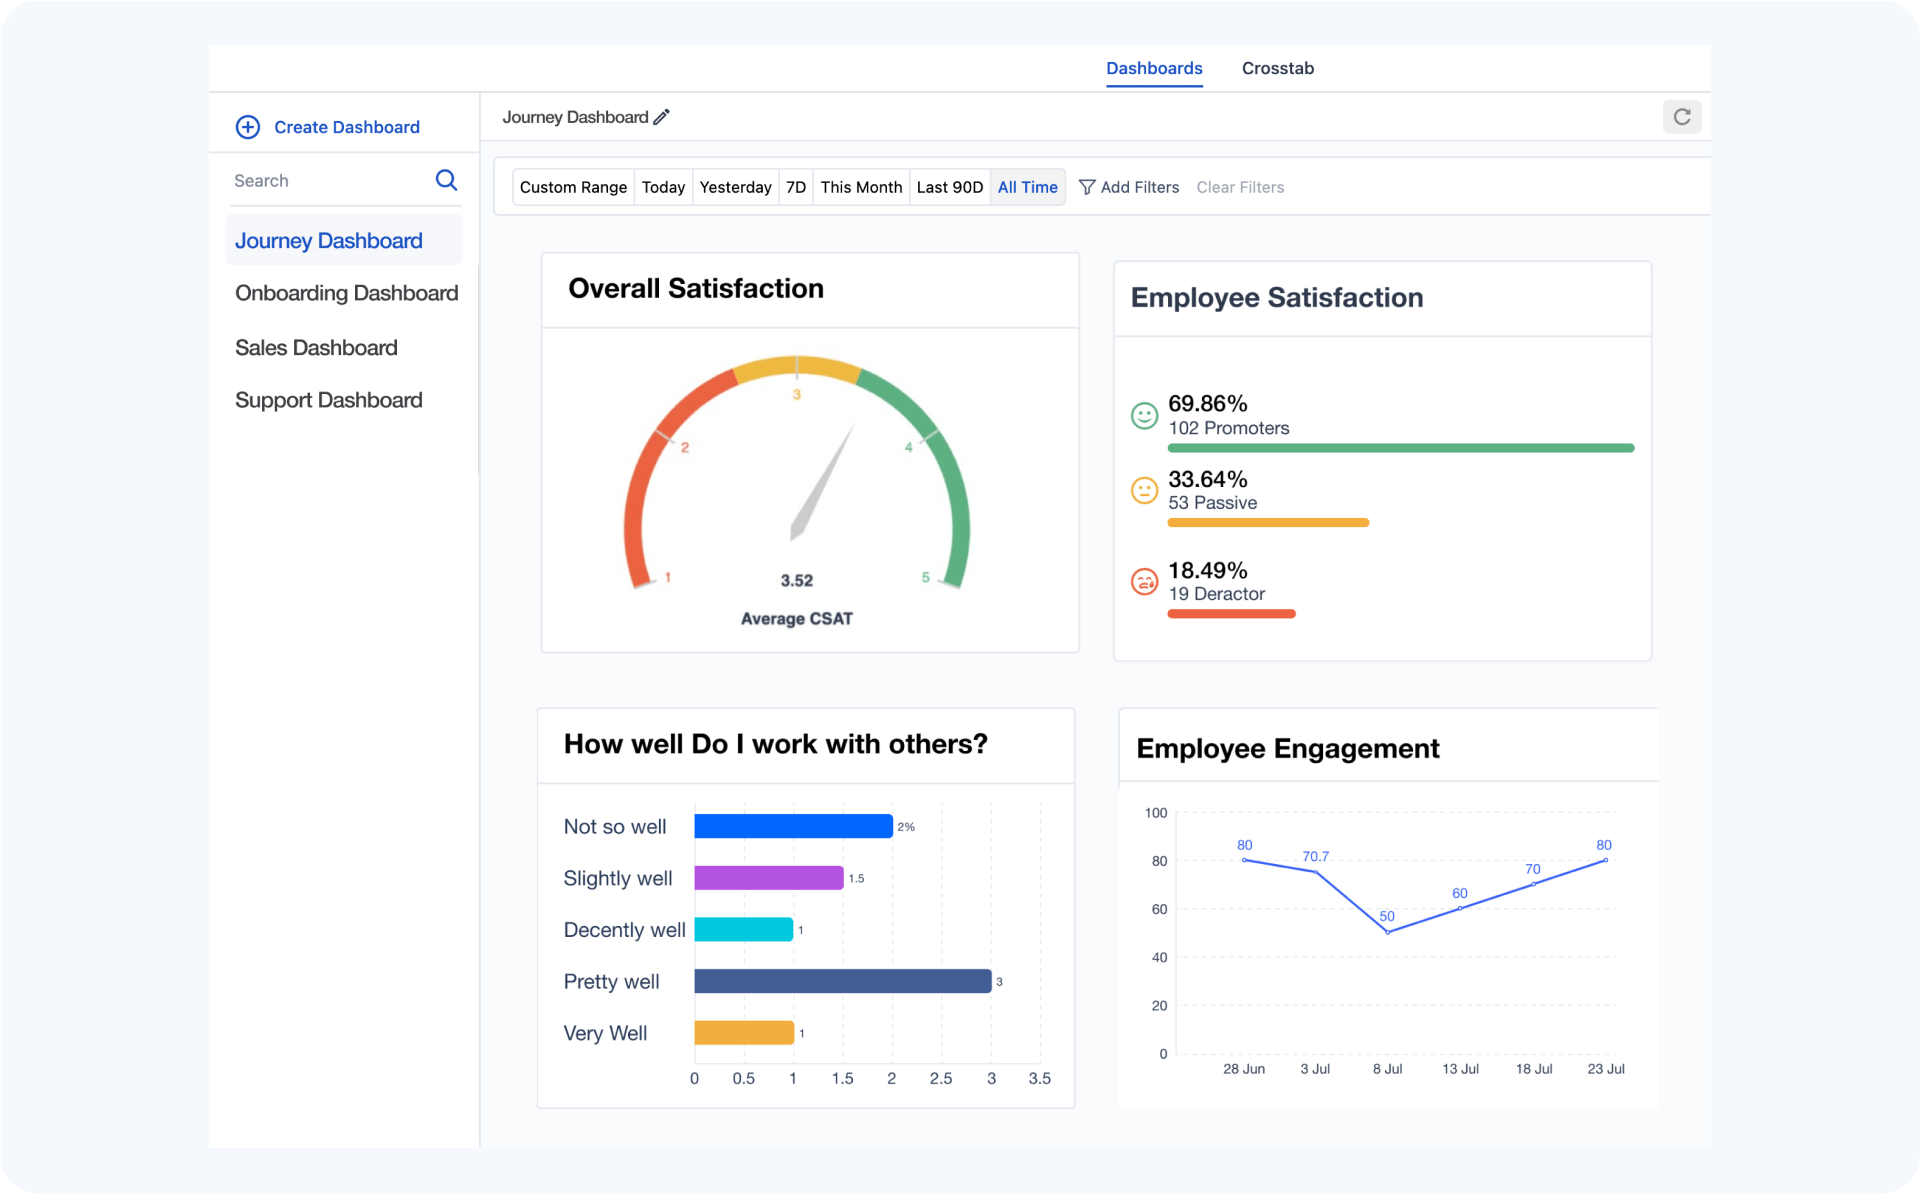 this image is the dashboard of employee experience survey. the detailed analysis gives insight into employee overall satisfaction 